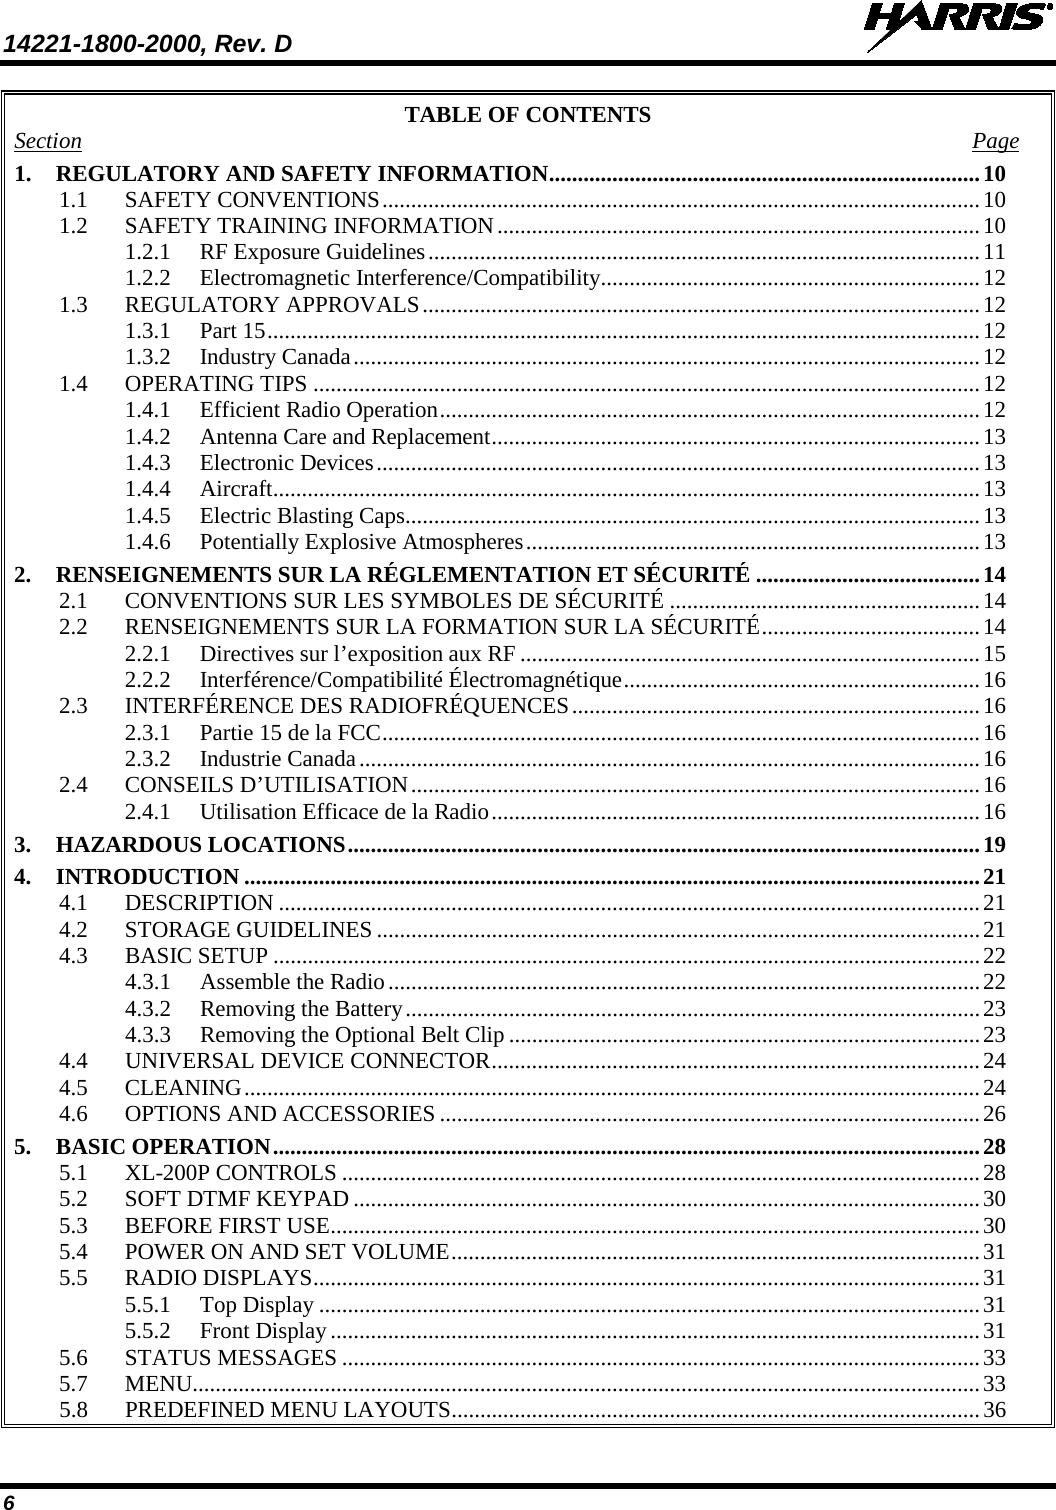 14221-1800-2000, Rev. D   6 TABLE OF CONTENTS Section  Page 1. REGULATORY AND SAFETY INFORMATION ........................................................................... 10 1.1 SAFETY CONVENTIONS ........................................................................................................ 10 1.2 SAFETY TRAINING INFORMATION .................................................................................... 10 1.2.1 RF Exposure Guidelines ................................................................................................ 11 1.2.2 Electromagnetic Interference/Compatibility .................................................................. 12 1.3 REGULATORY APPROVALS ................................................................................................. 12 1.3.1 Part 15 ............................................................................................................................ 12 1.3.2 Industry Canada ............................................................................................................. 12 1.4 OPERATING TIPS .................................................................................................................... 12 1.4.1 Efficient Radio Operation .............................................................................................. 12 1.4.2 Antenna Care and Replacement ..................................................................................... 13 1.4.3 Electronic Devices ......................................................................................................... 13 1.4.4 Aircraft ........................................................................................................................... 13 1.4.5 Electric Blasting Caps .................................................................................................... 13 1.4.6 Potentially Explosive Atmospheres ............................................................................... 13 2. RENSEIGNEMENTS SUR LA RÉGLEMENTATION ET SÉCURITÉ ....................................... 14 2.1 CONVENTIONS SUR LES SYMBOLES DE SÉCURITÉ ...................................................... 14 2.2 RENSEIGNEMENTS SUR LA FORMATION SUR LA SÉCURITÉ ...................................... 14 2.2.1 Directives sur l’exposition aux RF ................................................................................ 15 2.2.2 Interférence/Compatibilité Électromagnétique .............................................................. 16 2.3 INTERFÉRENCE DES RADIOFRÉQUENCES ....................................................................... 16 2.3.1 Partie 15 de la FCC ........................................................................................................ 16 2.3.2 Industrie Canada ............................................................................................................ 16 2.4 CONSEILS D’UTILISATION ................................................................................................... 16 2.4.1 Utilisation Efficace de la Radio ..................................................................................... 16 3. HAZARDOUS LOCATIONS .............................................................................................................. 19 4. INTRODUCTION ................................................................................................................................ 21 4.1 DESCRIPTION .......................................................................................................................... 21 4.2 STORAGE GUIDELINES ......................................................................................................... 21 4.3 BASIC SETUP ........................................................................................................................... 22 4.3.1 Assemble the Radio ....................................................................................................... 22 4.3.2 Removing the Battery .................................................................................................... 23 4.3.3 Removing the Optional Belt Clip .................................................................................. 23 4.4 UNIVERSAL DEVICE CONNECTOR ..................................................................................... 24 4.5 CLEANING ................................................................................................................................ 24 4.6 OPTIONS AND ACCESSORIES .............................................................................................. 26 5. BASIC OPERATION ........................................................................................................................... 28 5.1 XL-200P CONTROLS ............................................................................................................... 28 5.2 SOFT DTMF KEYPAD ............................................................................................................. 30 5.3 BEFORE FIRST USE ................................................................................................................. 30 5.4 POWER ON AND SET VOLUME ............................................................................................ 31 5.5 RADIO DISPLAYS .................................................................................................................... 31 5.5.1 Top Display ................................................................................................................... 31 5.5.2 Front Display ................................................................................................................. 31 5.6 STATUS MESSAGES ............................................................................................................... 33 5.7 MENU......................................................................................................................................... 33 5.8 PREDEFINED MENU LAYOUTS ............................................................................................ 36 